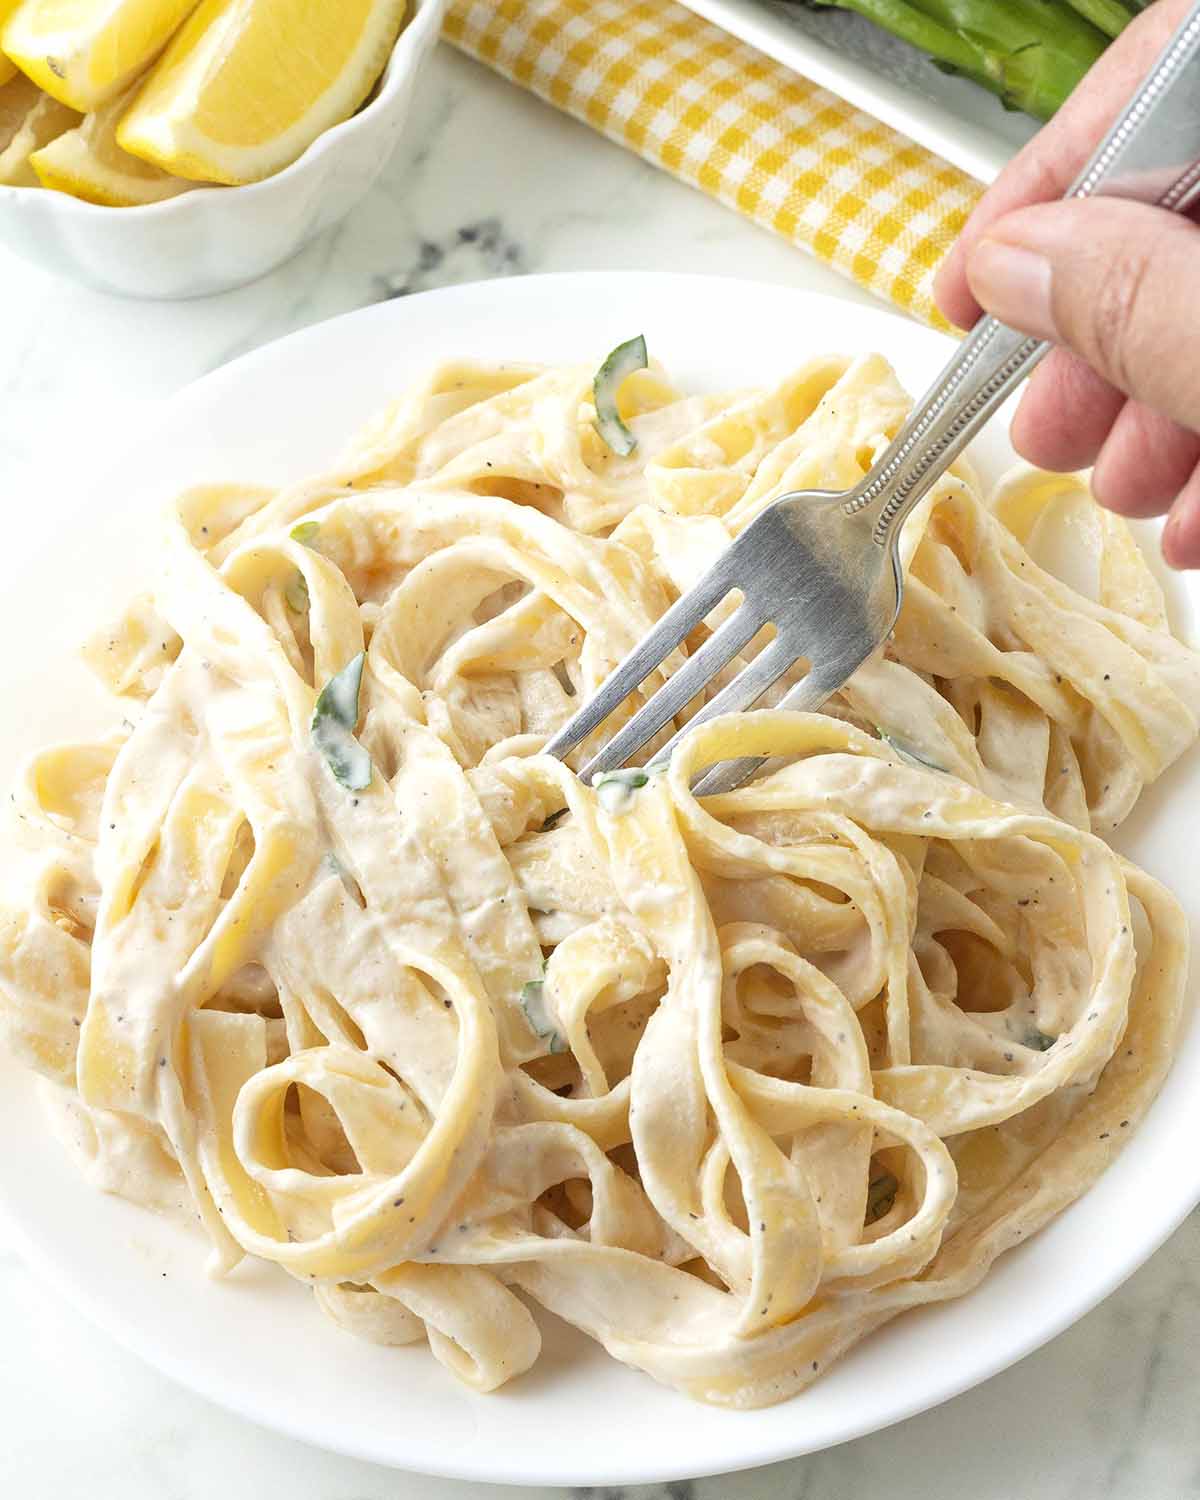 A hand holding a fork, the fork is digging into a plate of pasta with tahini sauce.